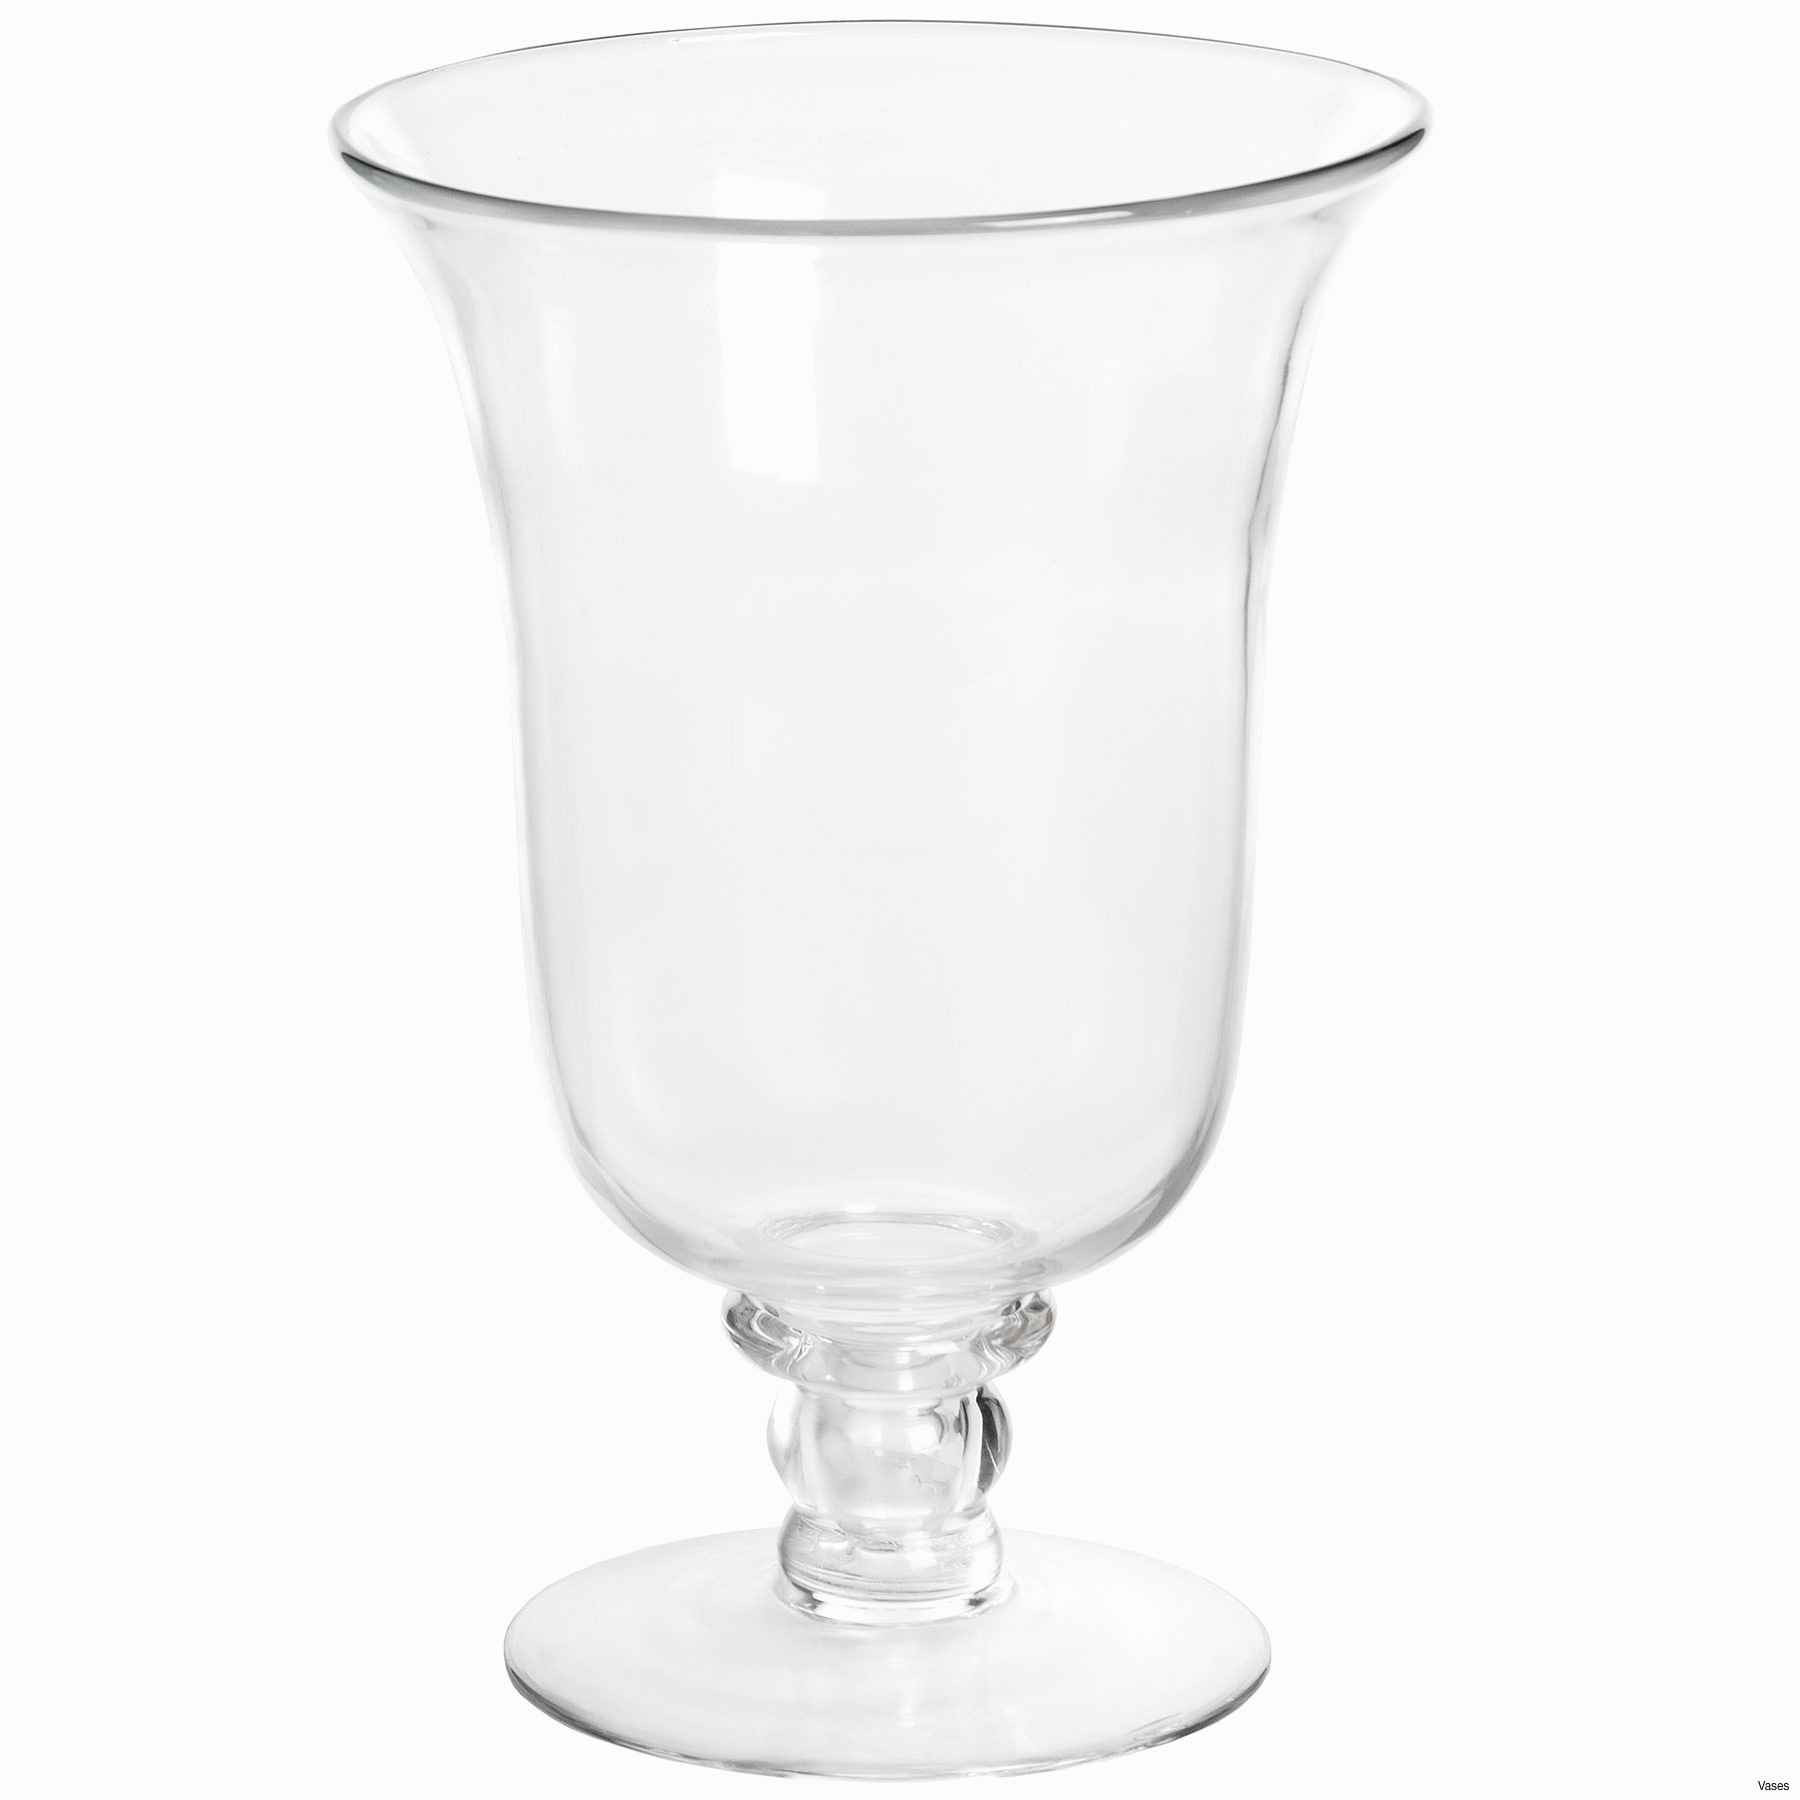 23 Awesome where to Buy Cylinder Vases In Bulk 2024 free download where to buy cylinder vases in bulk of candle stands wholesale lovely faux crystal candle holders alive with regard to candle stands wholesale lovely faux crystal candle holders alive vases 